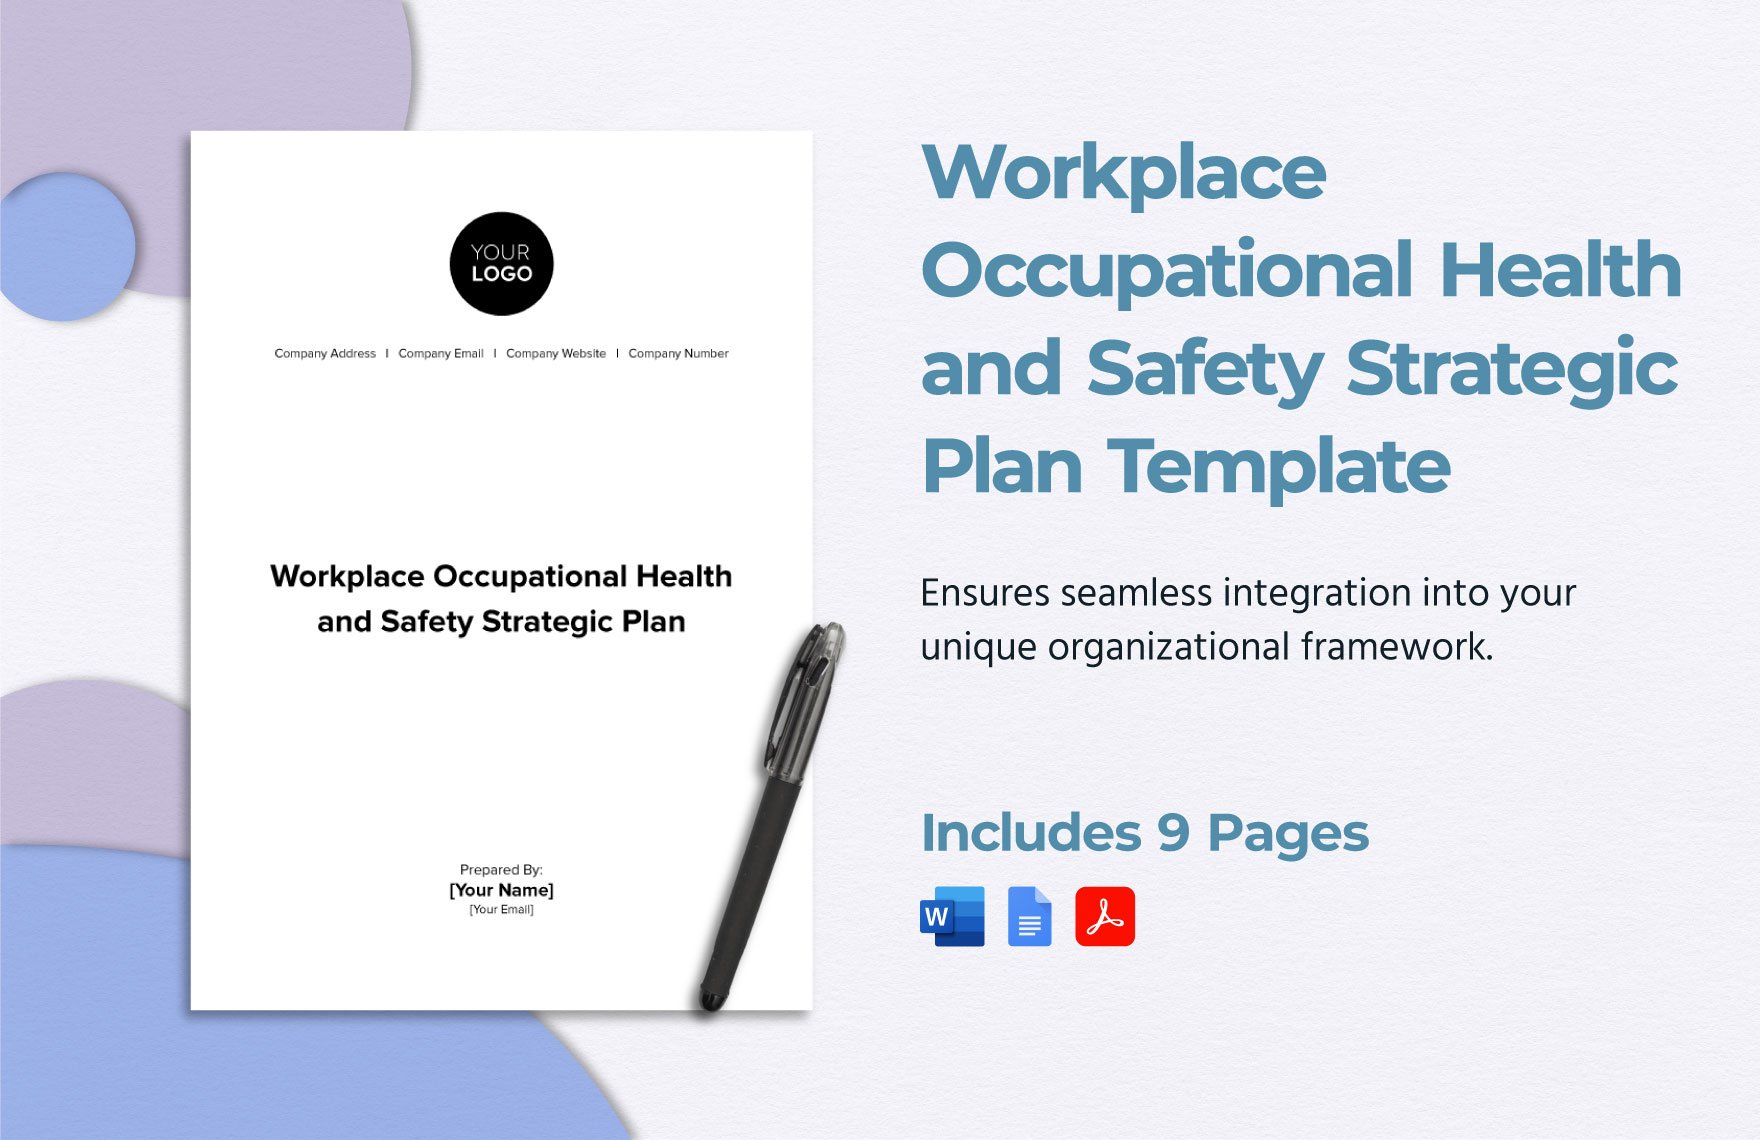 Workplace Occupational Health and Safety Strategic Plan Template